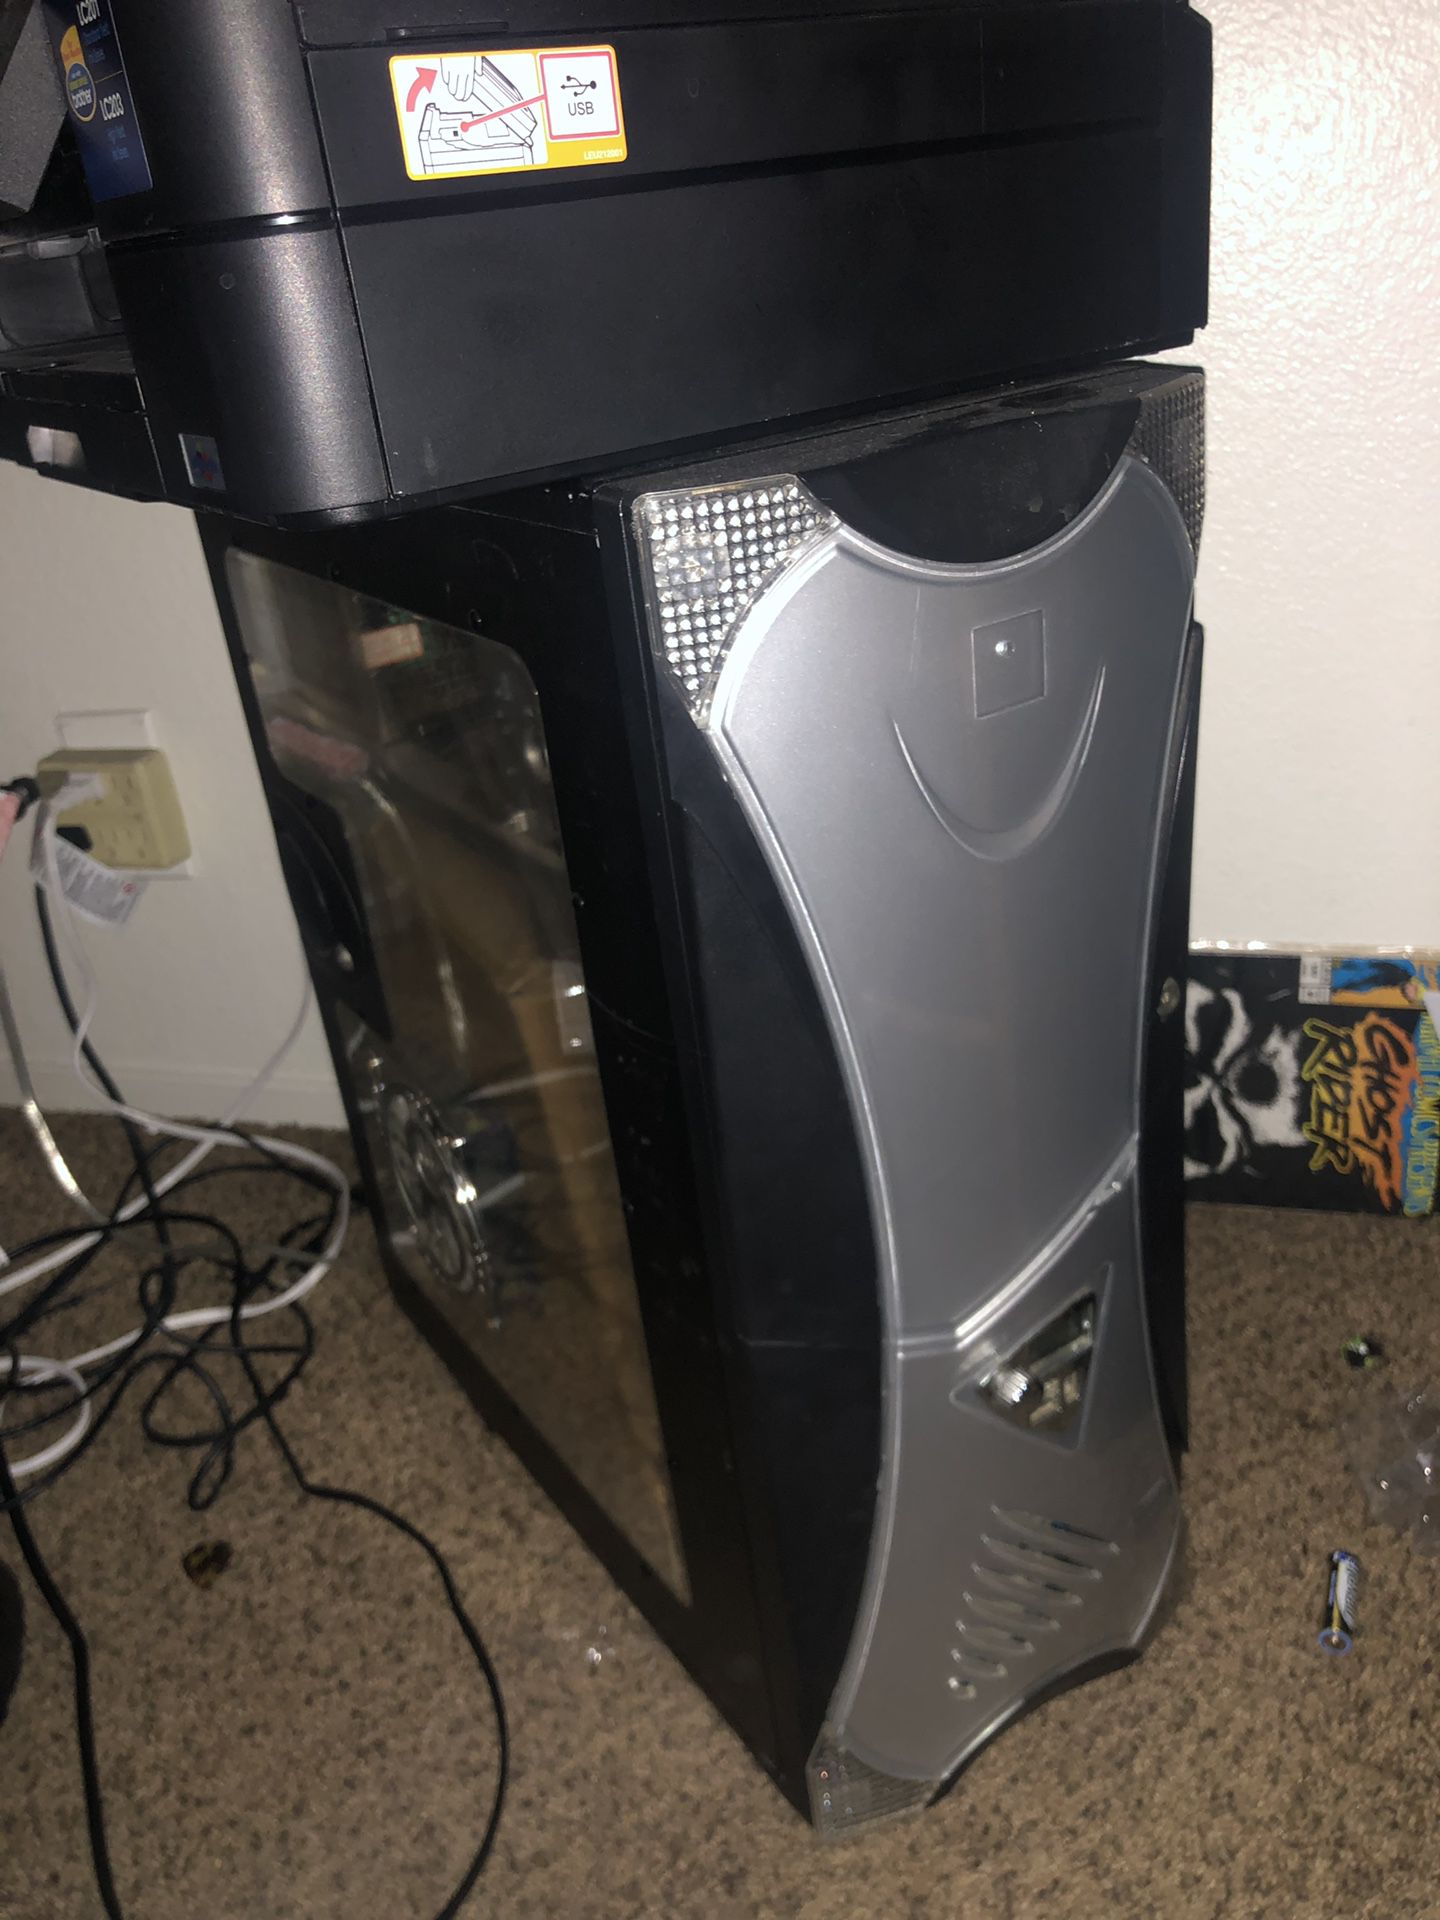 Full size ATX PC case with misc parts